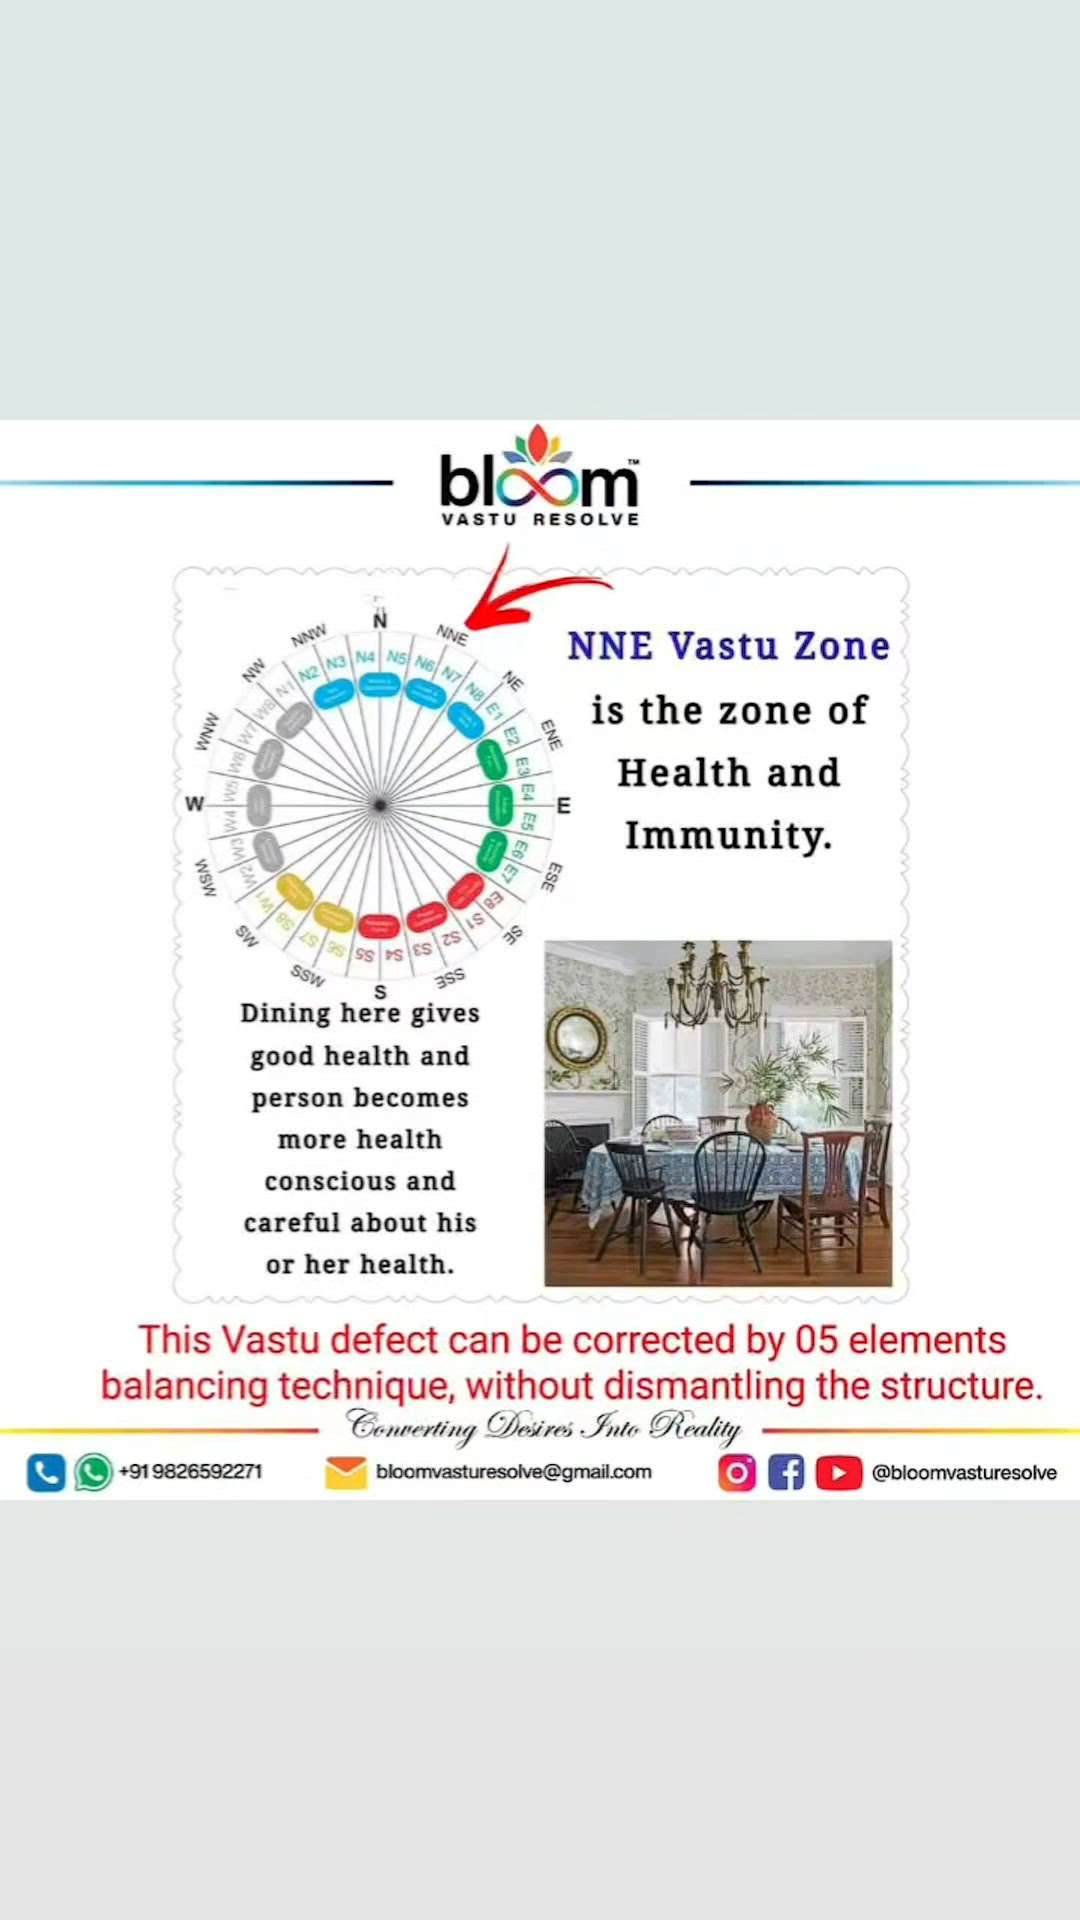 Your queries and comments are always welcome.
For more Vastu please follow @bloomvasturesolve
on YouTube, Instagram & Facebook
.
.
For personal consultation, feel free to contact certified MahaVastu Expert through
M - 9826592271
Or
bloomvasturesolve@gmail.com
#vastu #वास्तु #mahavastu #mahavastuexpert #bloomvasturesolve  #vastureels #vastulogy #vastuexpert  #vasturemedies  #vastuforhome #vastuforpeace #vastudosh #numerology #vastuforgrowth #numerology #nnezone #vastuforhealth #dining #diningtable